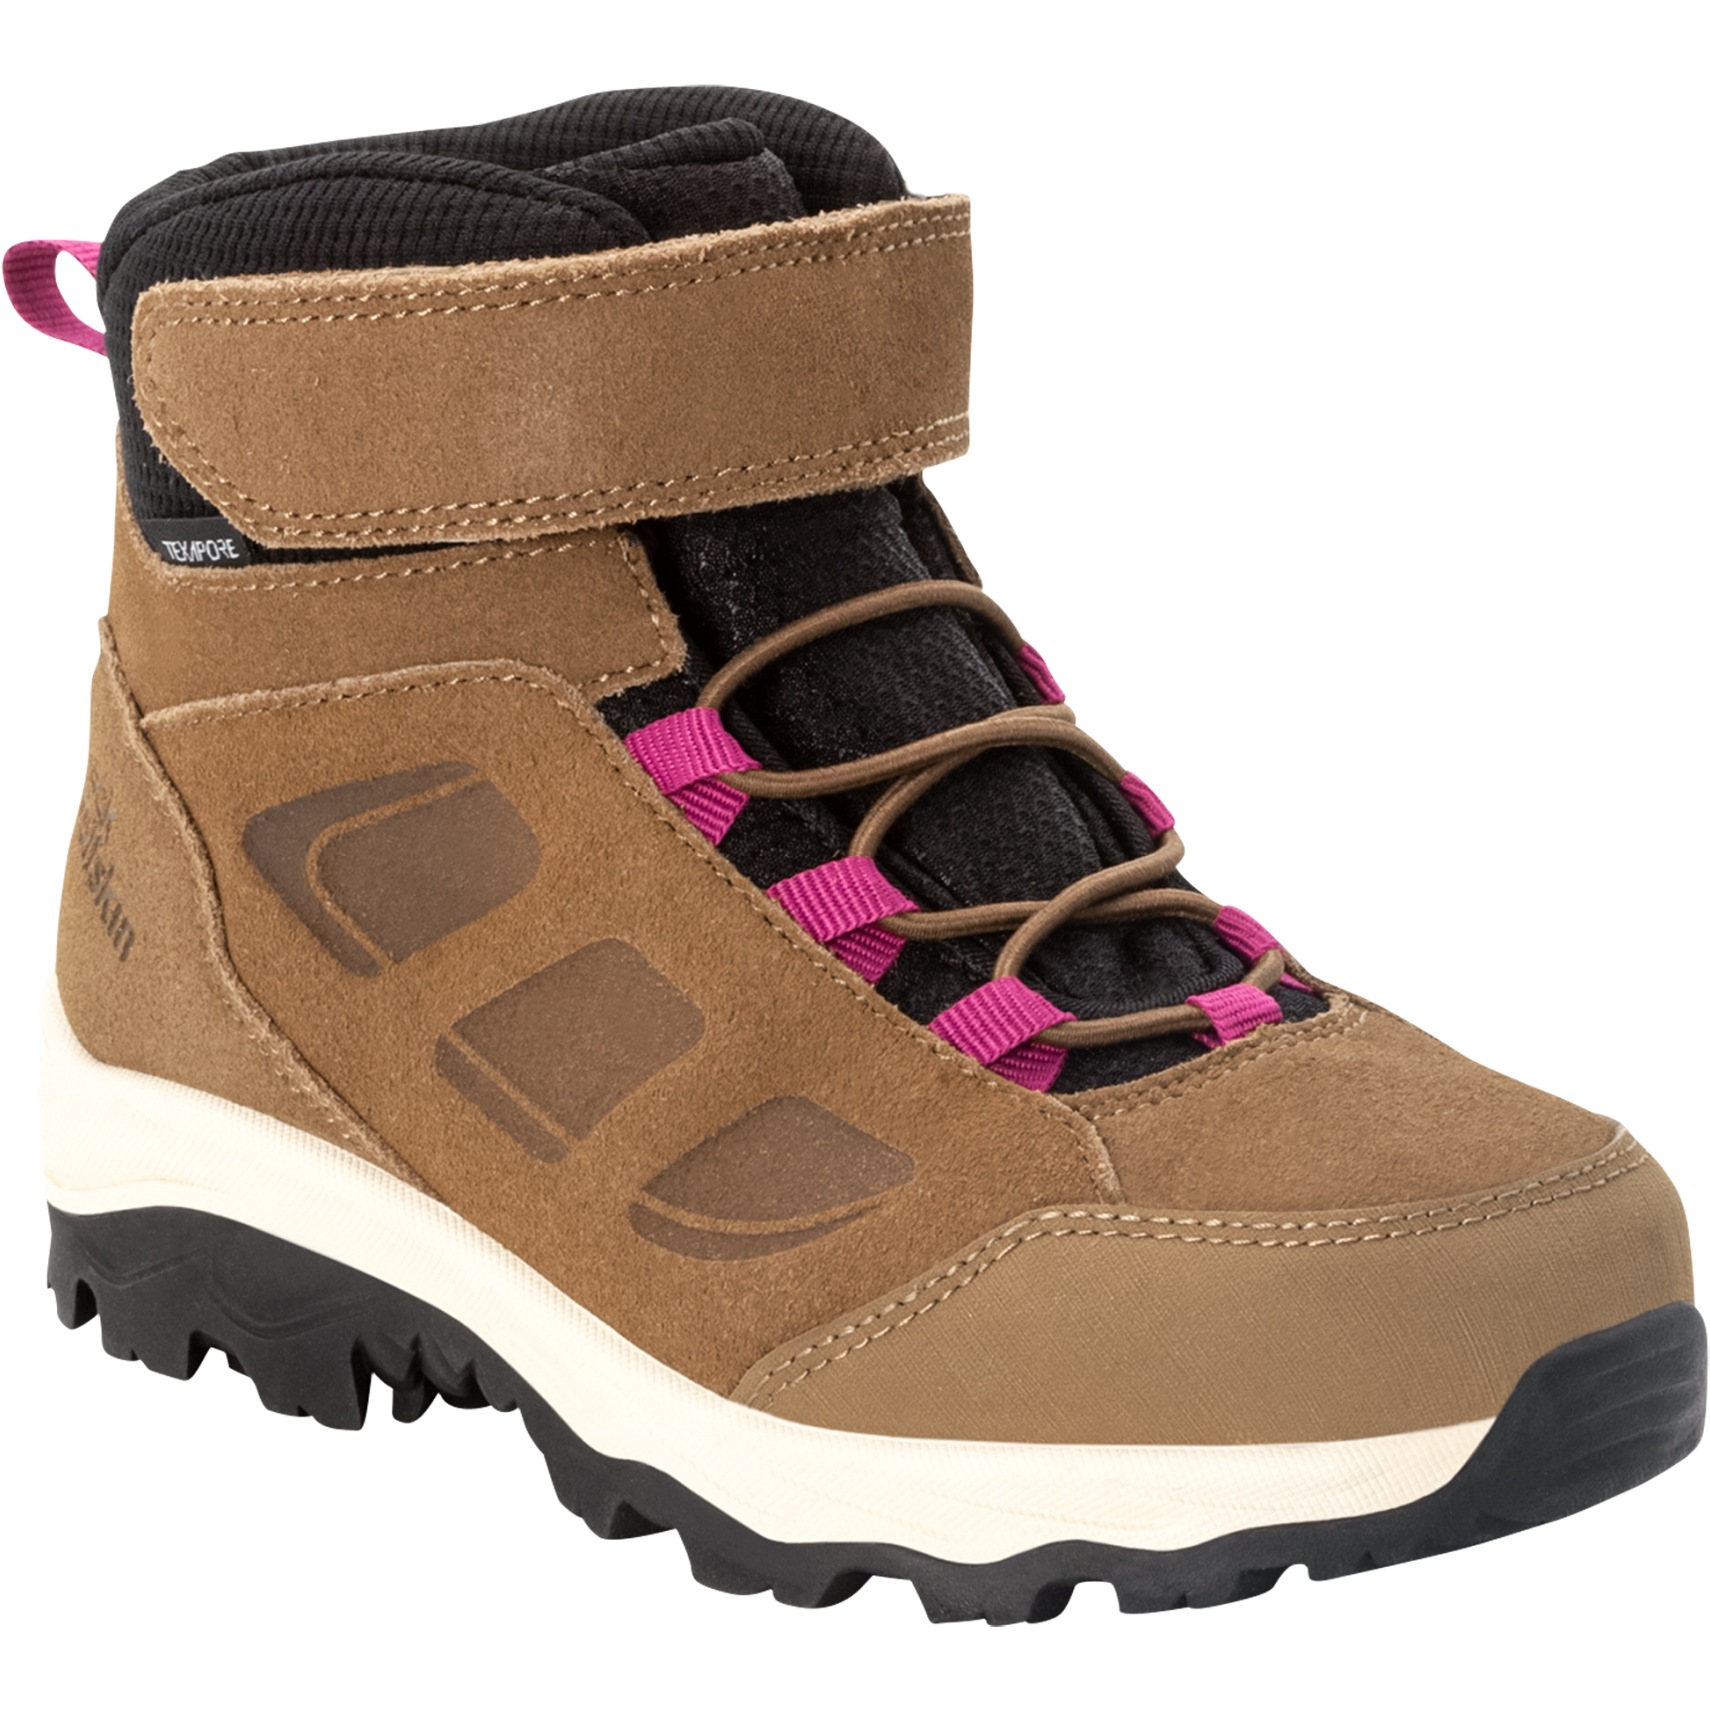 Picture of Jack Wolfskin Vojo LT Texapore Mid Hiking Boots Kids - brown / pink